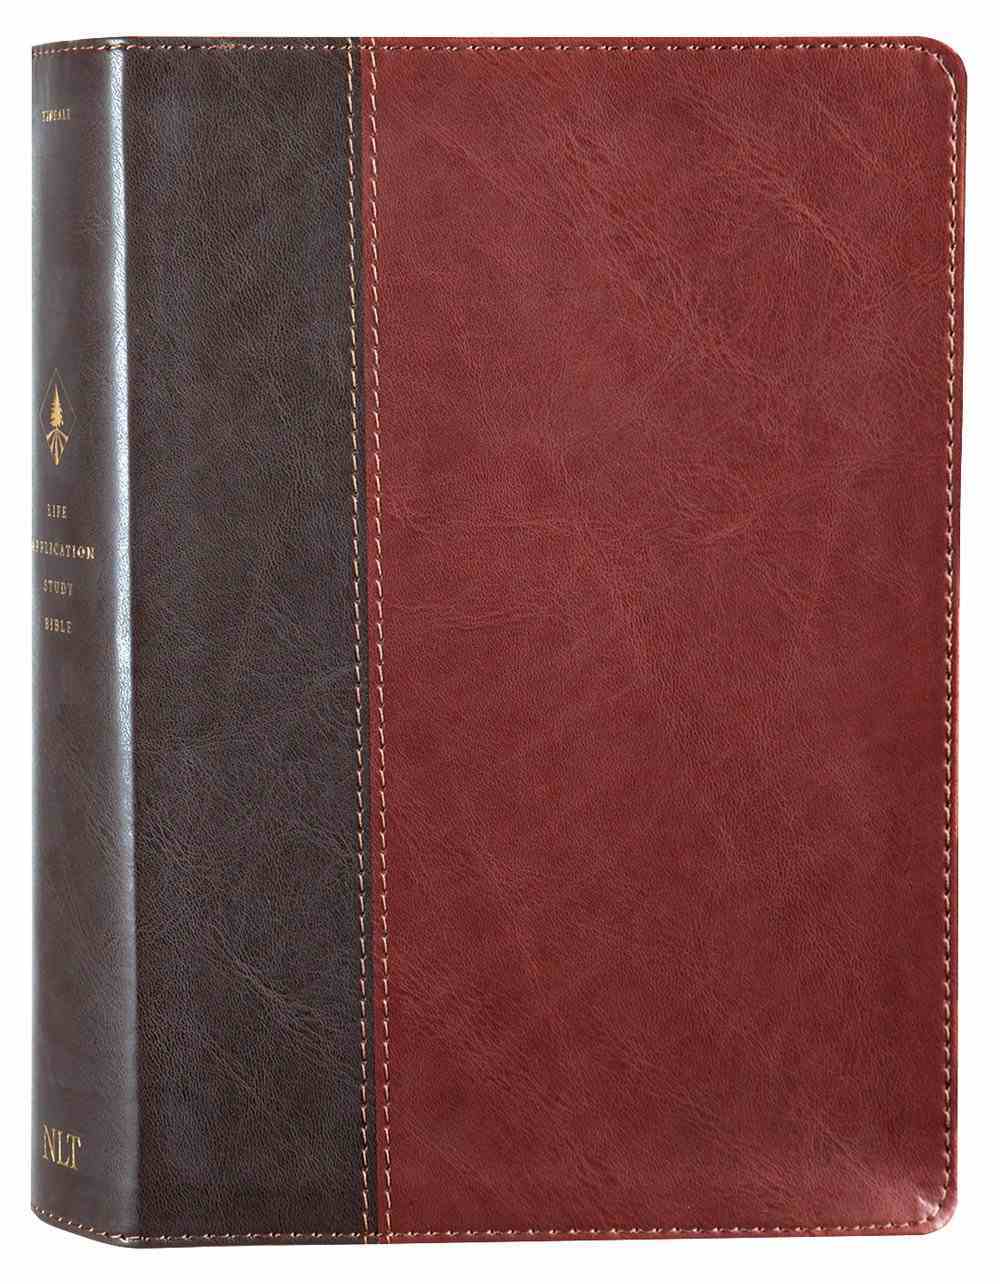 NLT Life Application Study Bible 3rd Edition Brown/Tan (Black Letter Edition) Imitation Leather